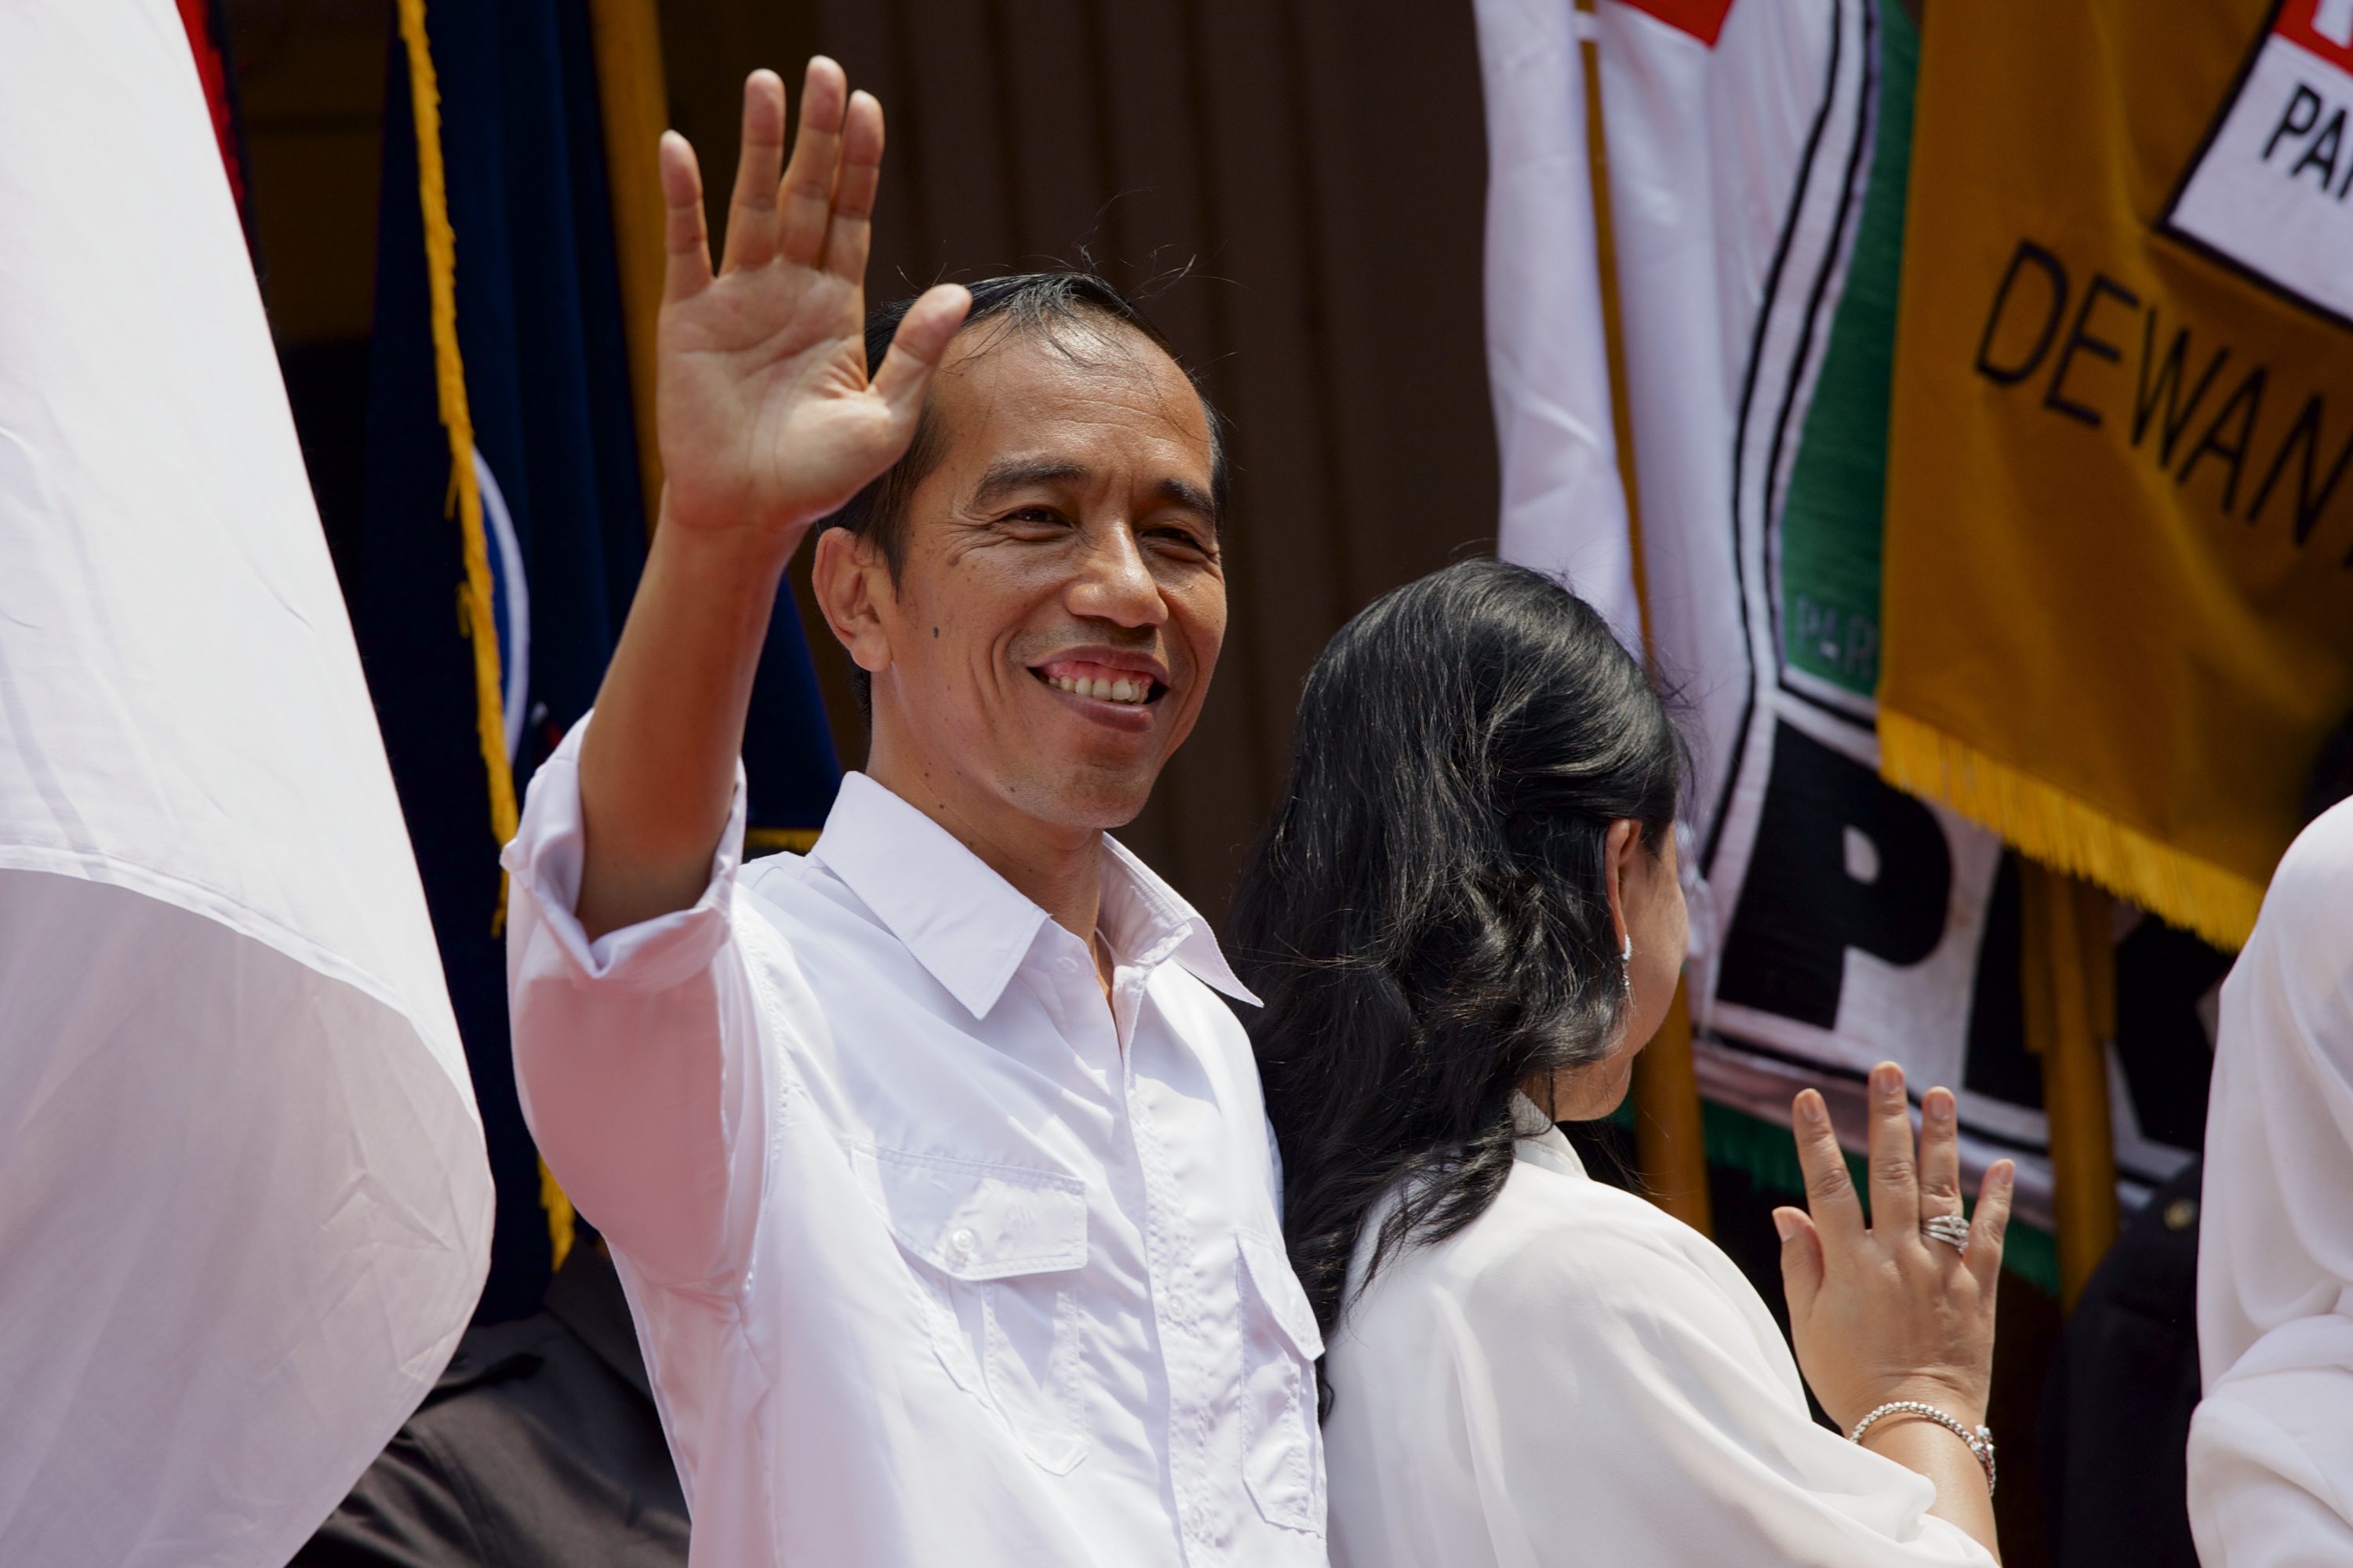 Indonesian presidential candidate Joko Widodo waves to a crowd of supporters after officially naming Jusuf Kalla as his vice-presidential running mate in Jakarta on May 19, 2014 (Ed Wray—Getty Images)